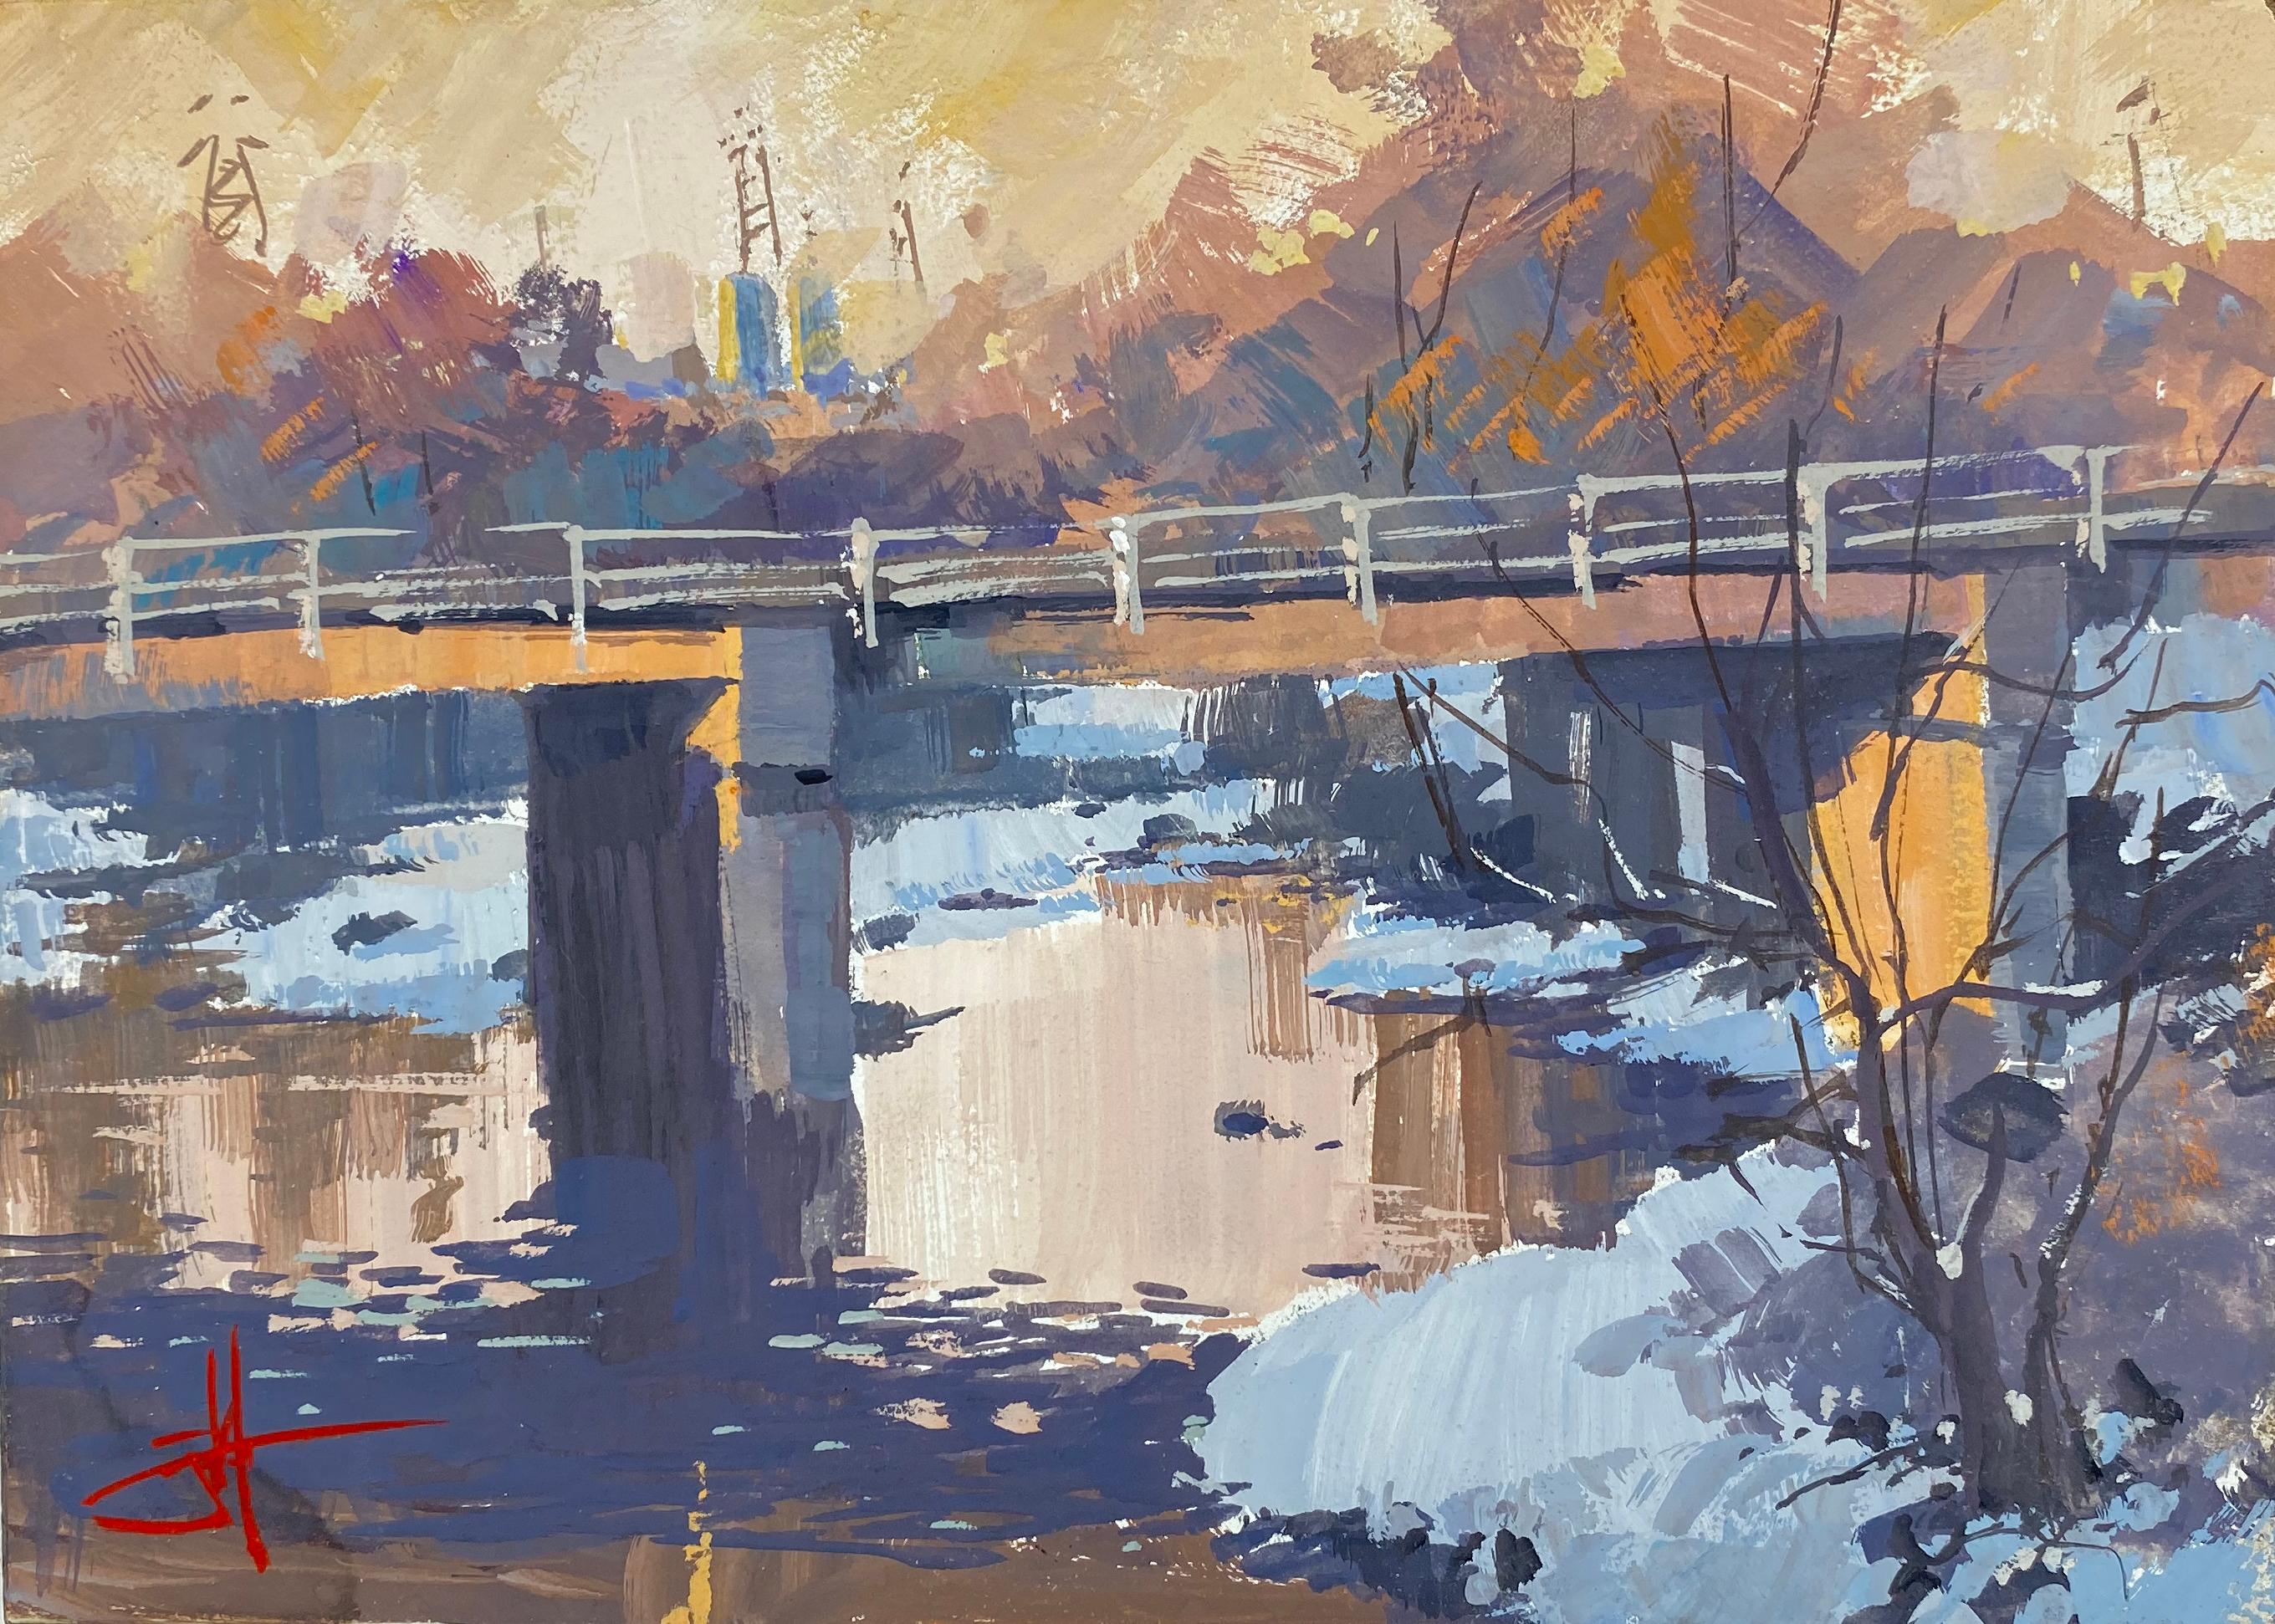 Judd Mercer Figurative Painting - "Cold Overpass" Gouache Painting